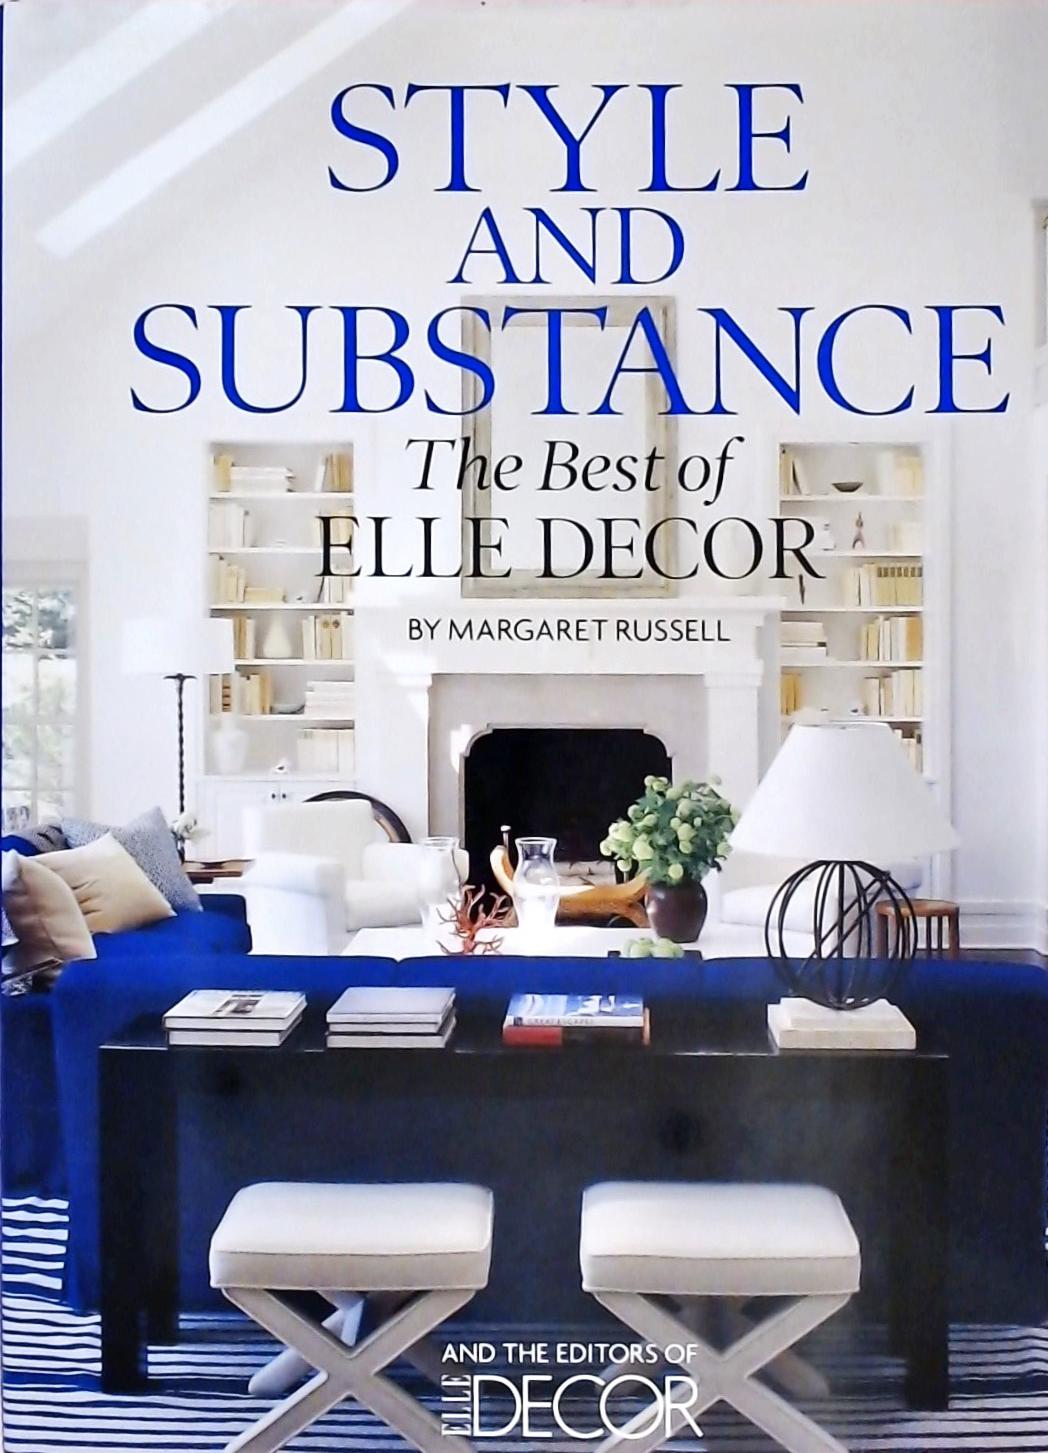 Style and Substance - The Best of Elle Decor